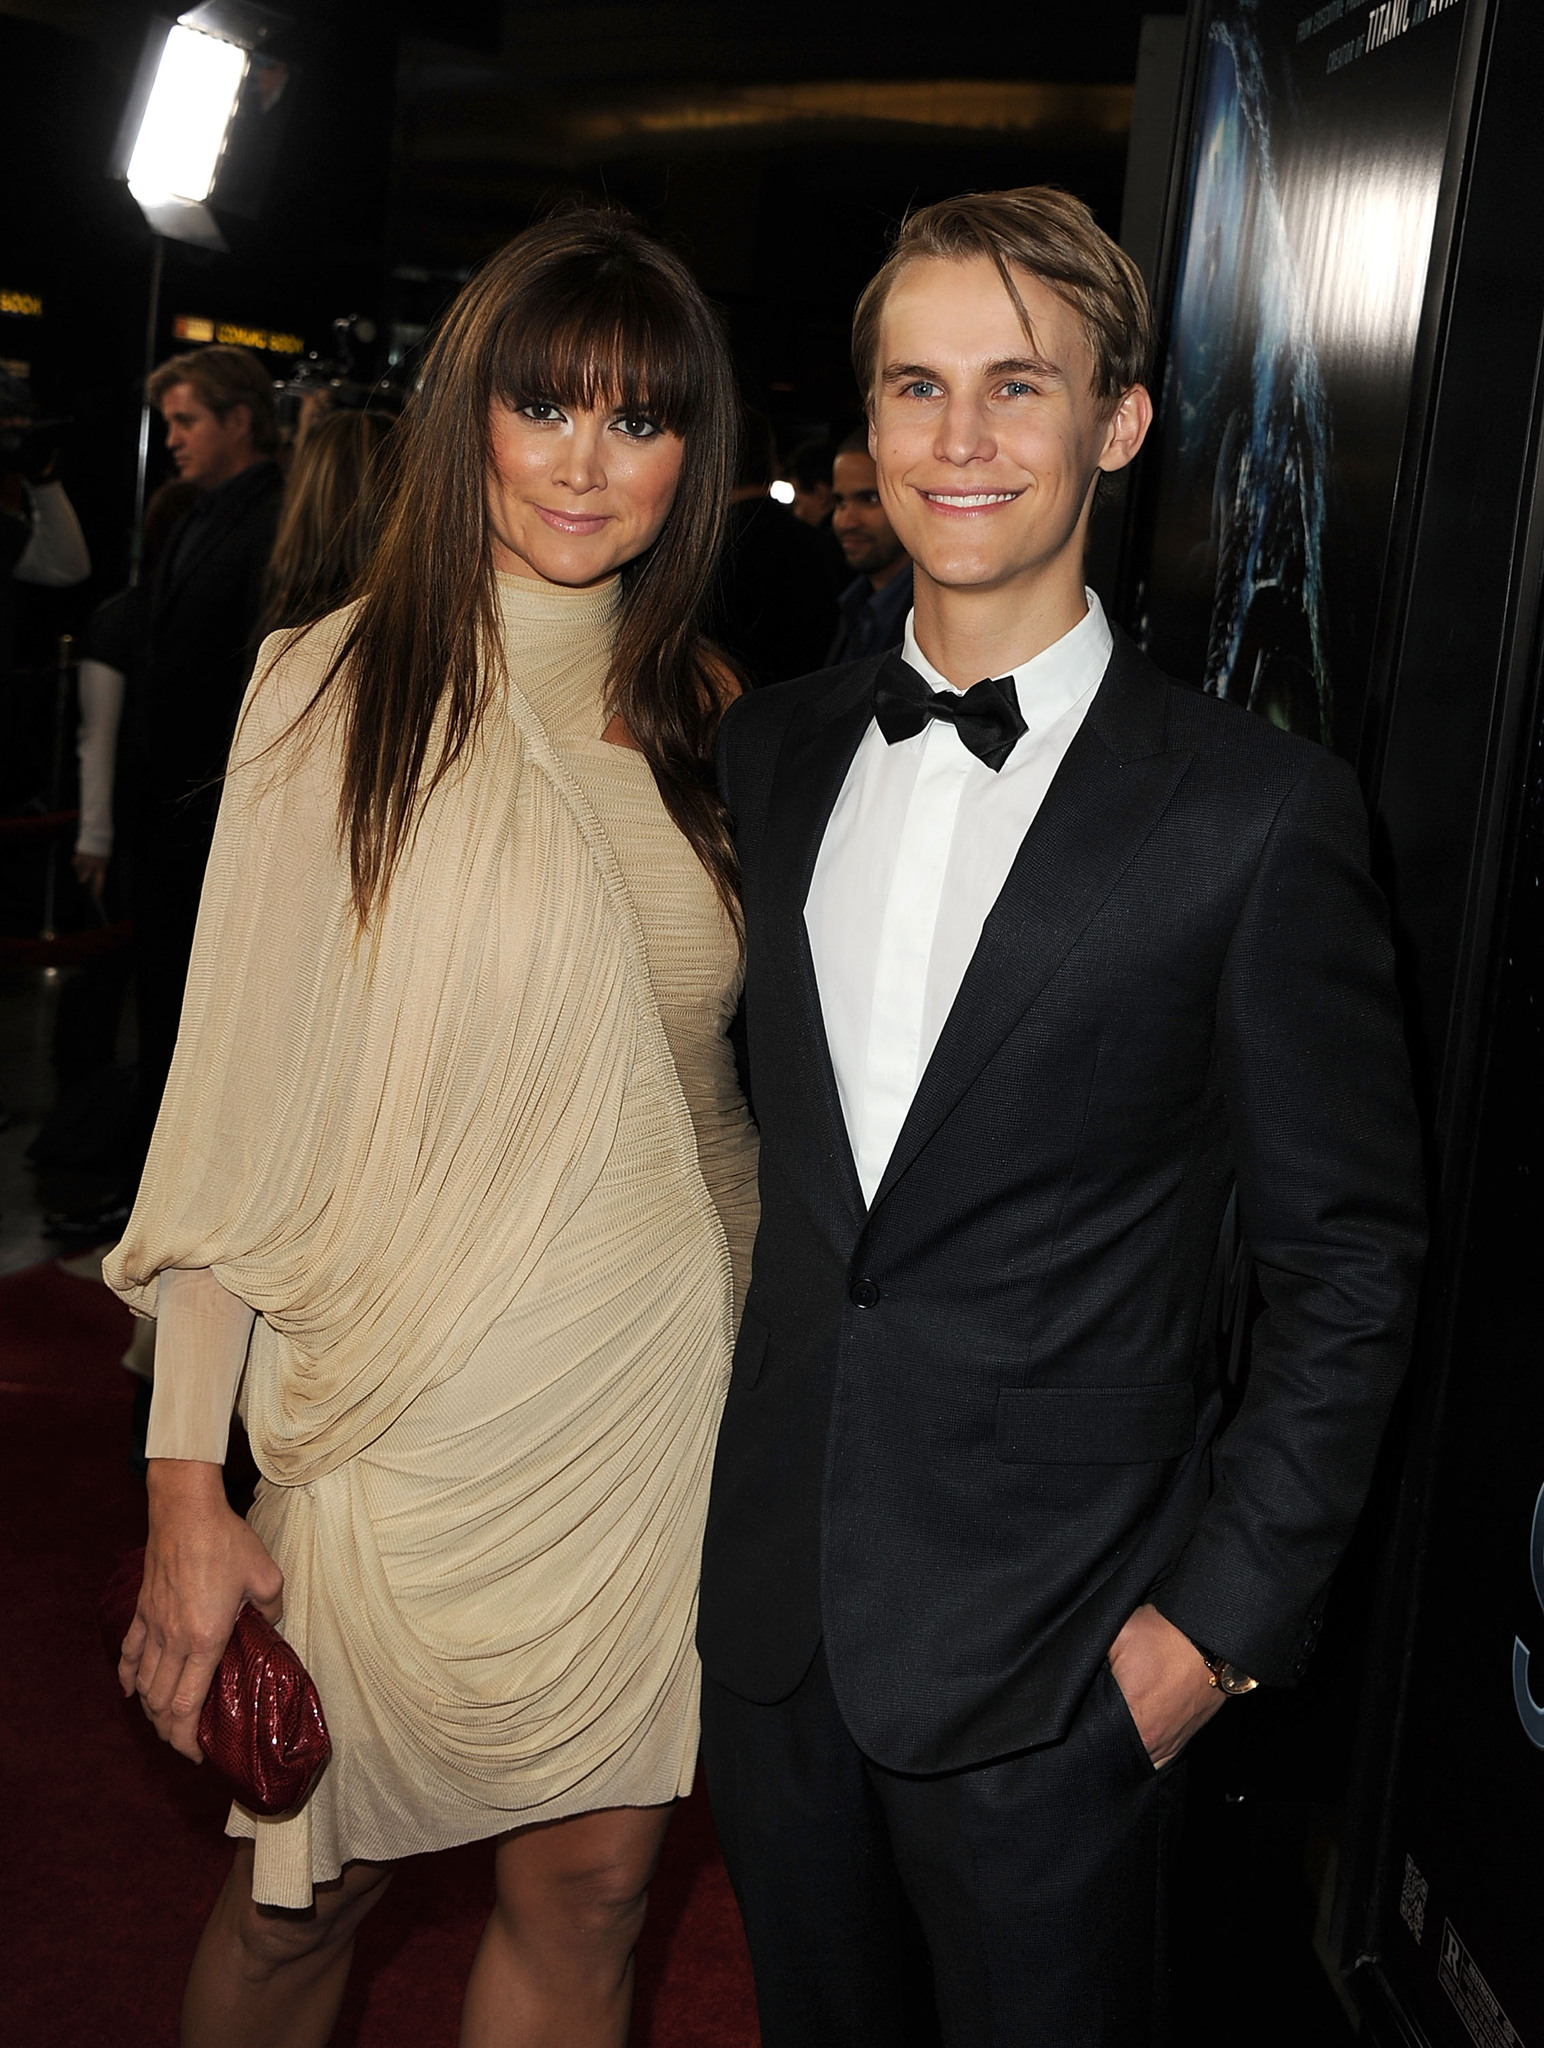 Rhys Wakefield and Alice Parkinson at event of Sanctum 3D (2011)